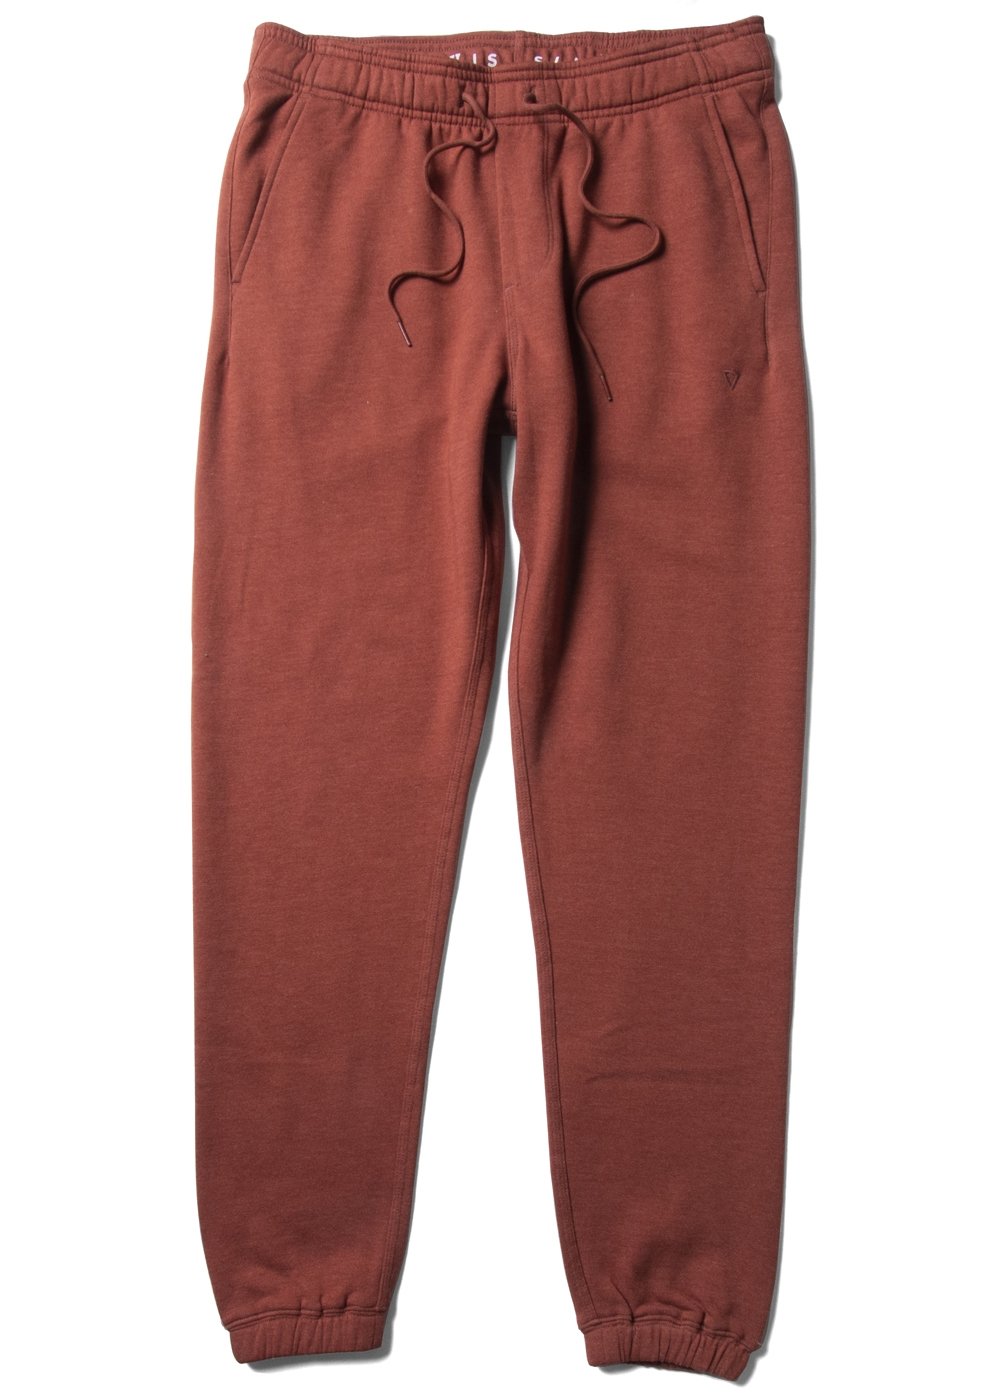 Solid Sets Eco Elastic Sweatpant - BARN RED HEATHER